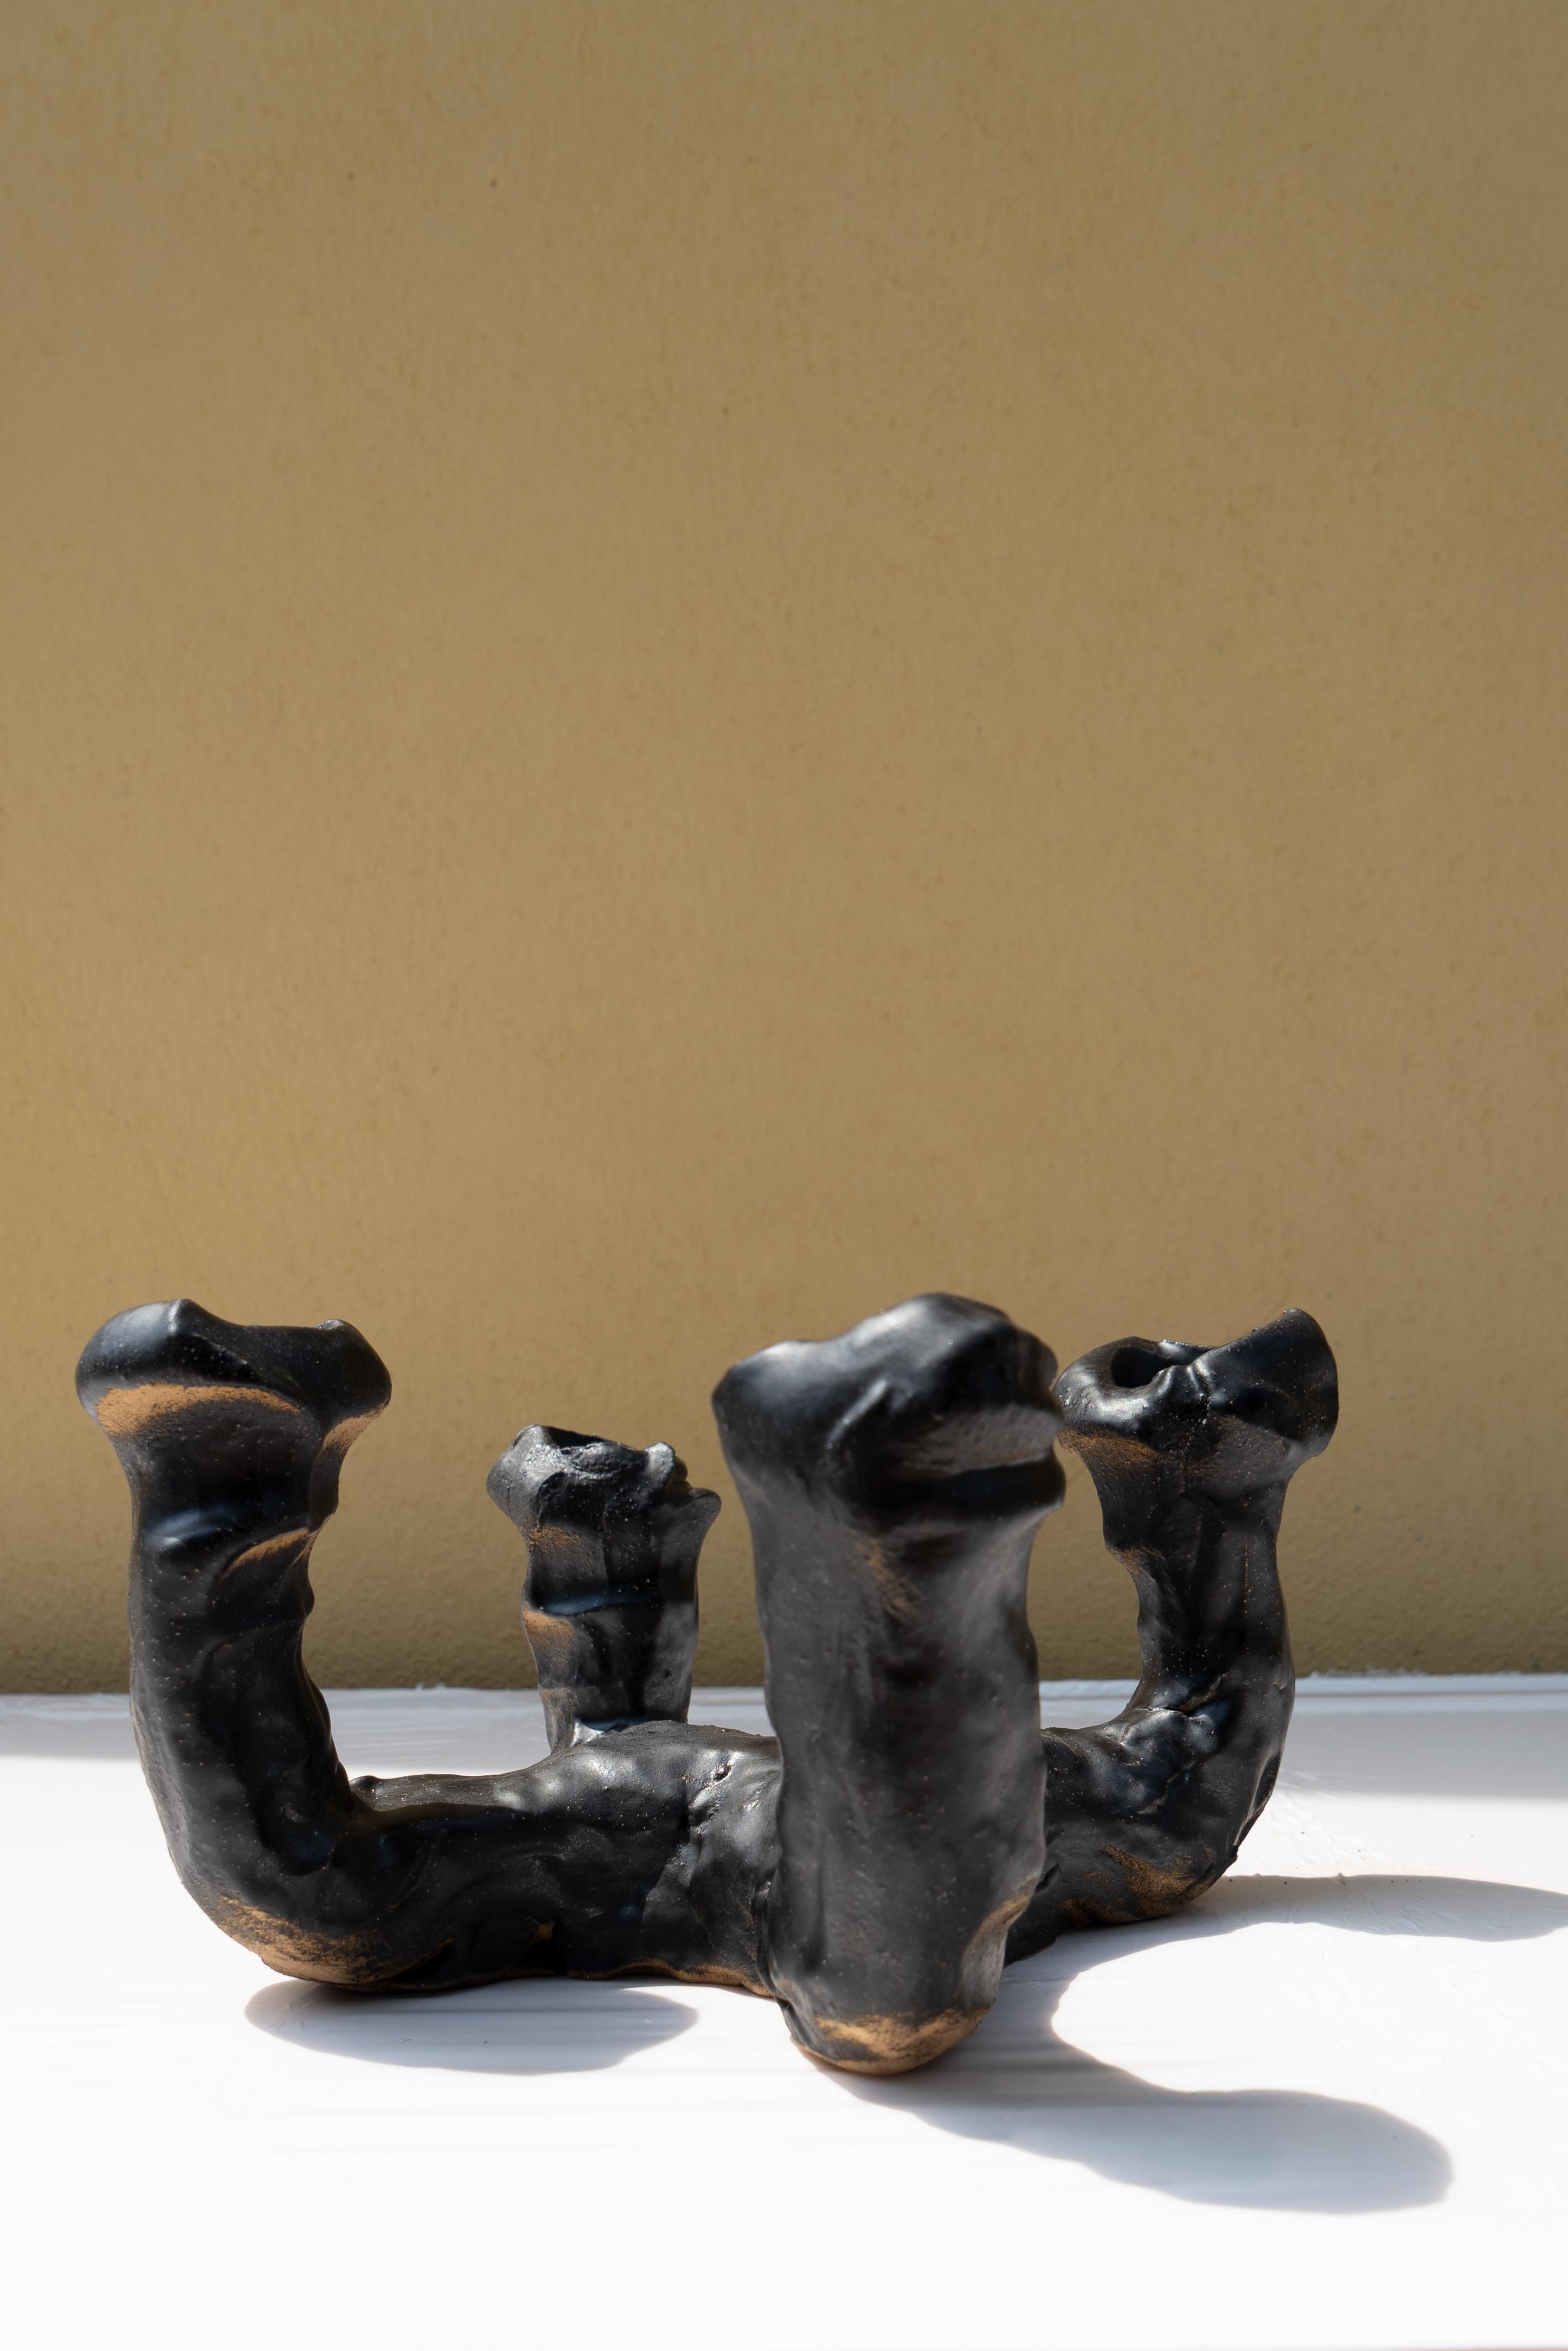 Matte black candelabra by Daniele Giannetti
Dimensions: Ø 29 x H 14 cm.
Materials: Glazed terracotta. 
This candelabra can hold four candles. Also available for three candles.

All pieces are made in terracotta from Montelupo, only fired once,